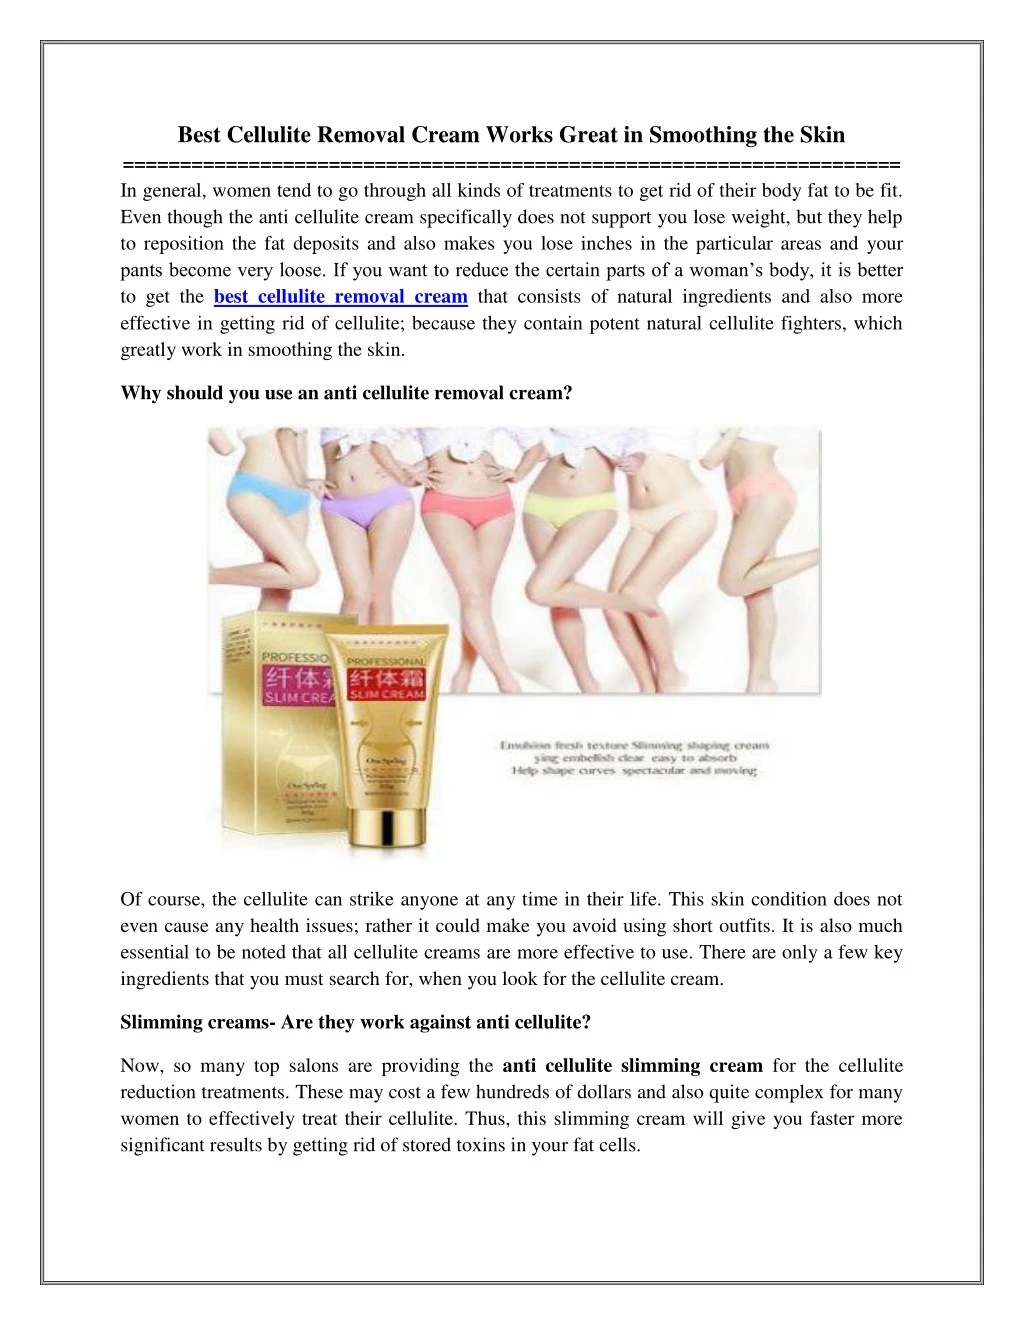 best cellulite removal cream works great